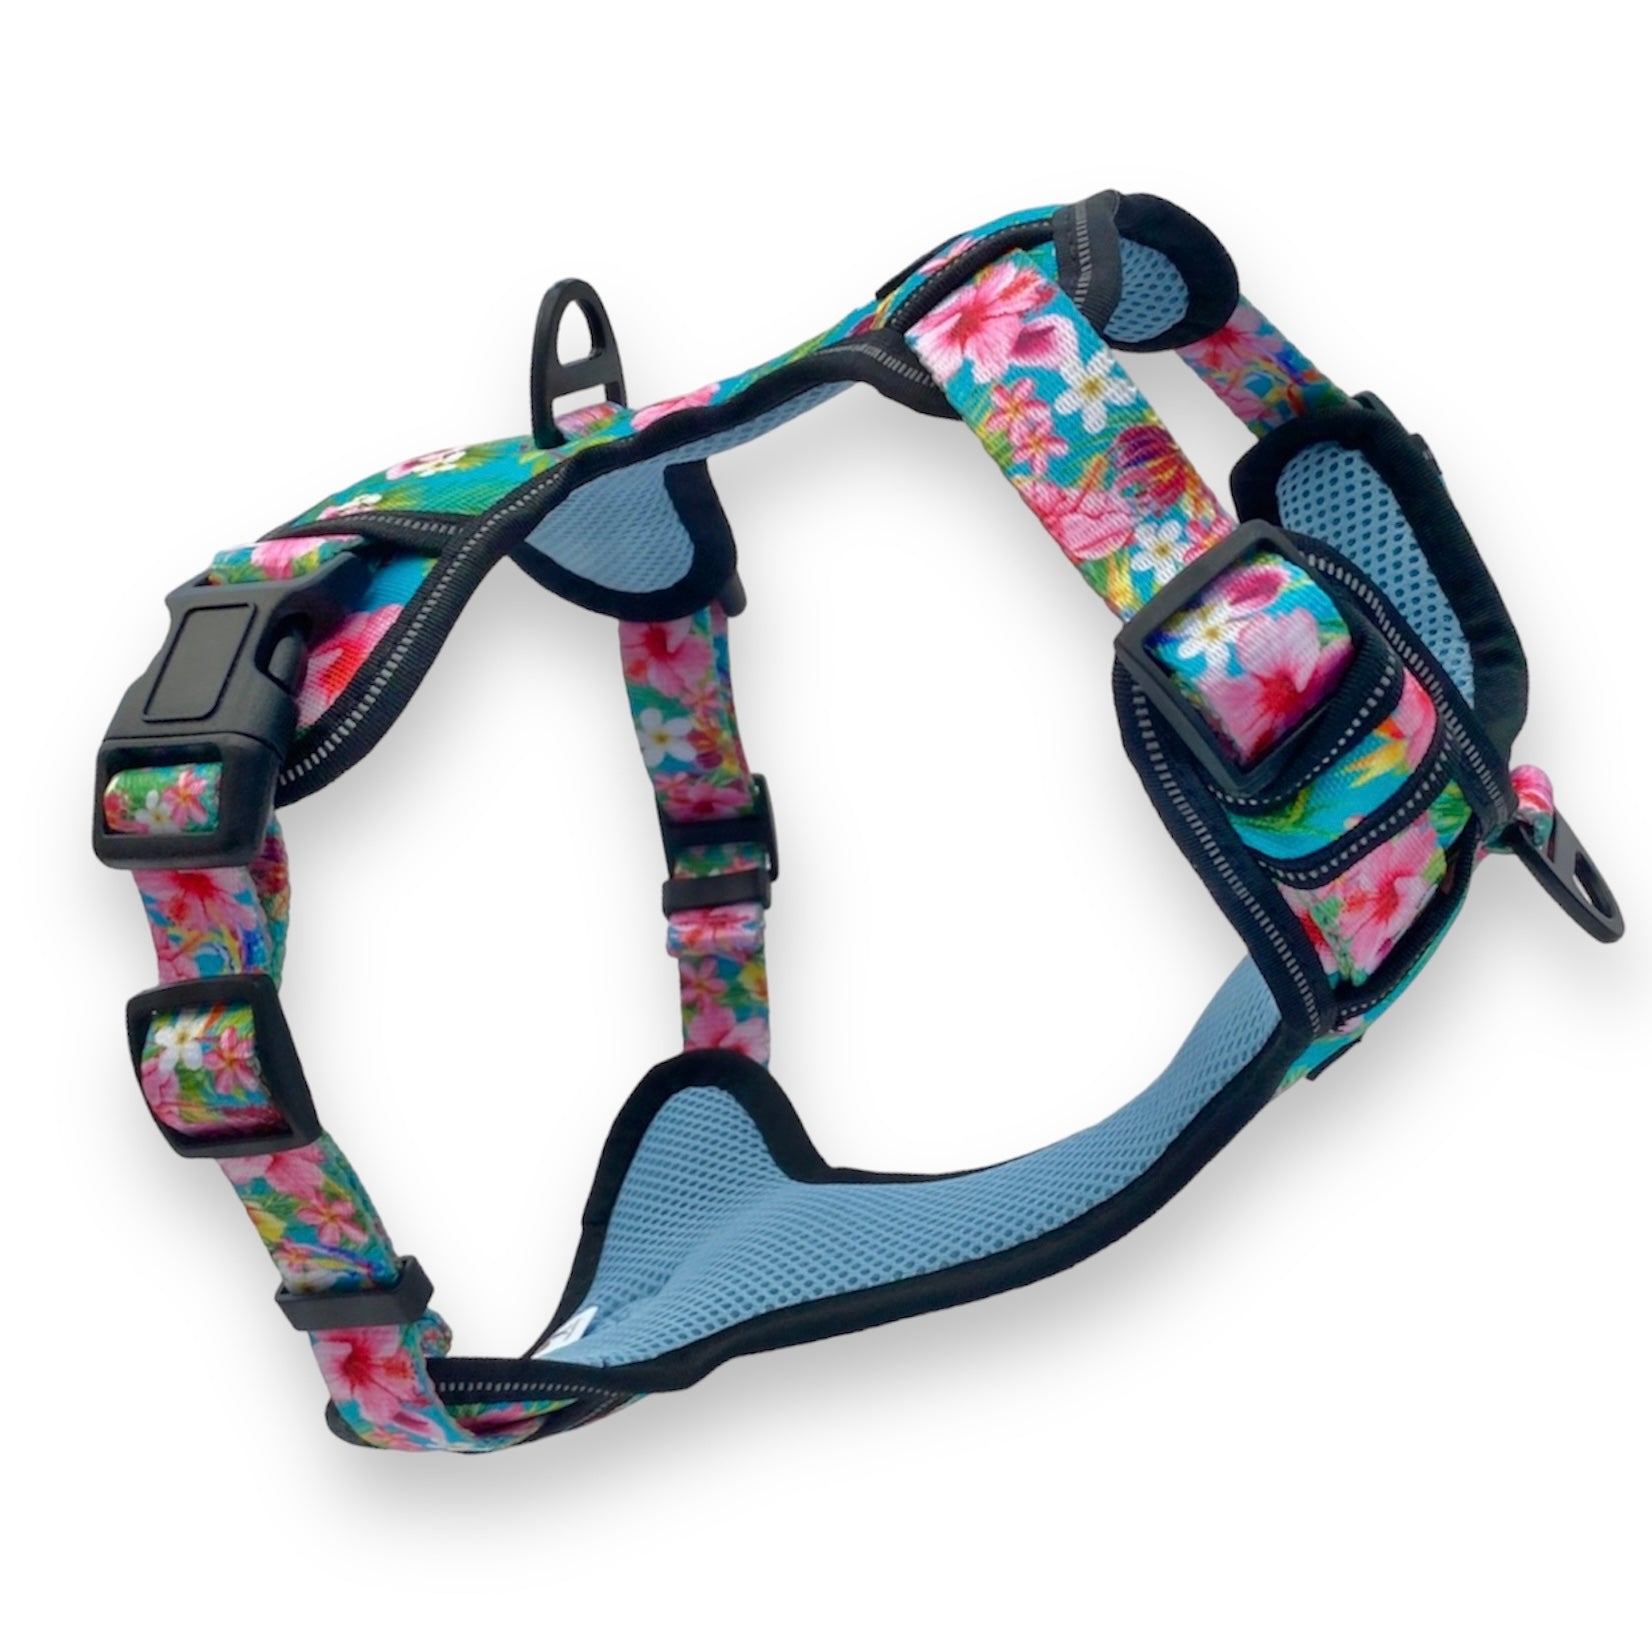 a 3d photo of a teal blue floral dog harness with bright pink flowers it is a front and back clip dog harness from fearless pet